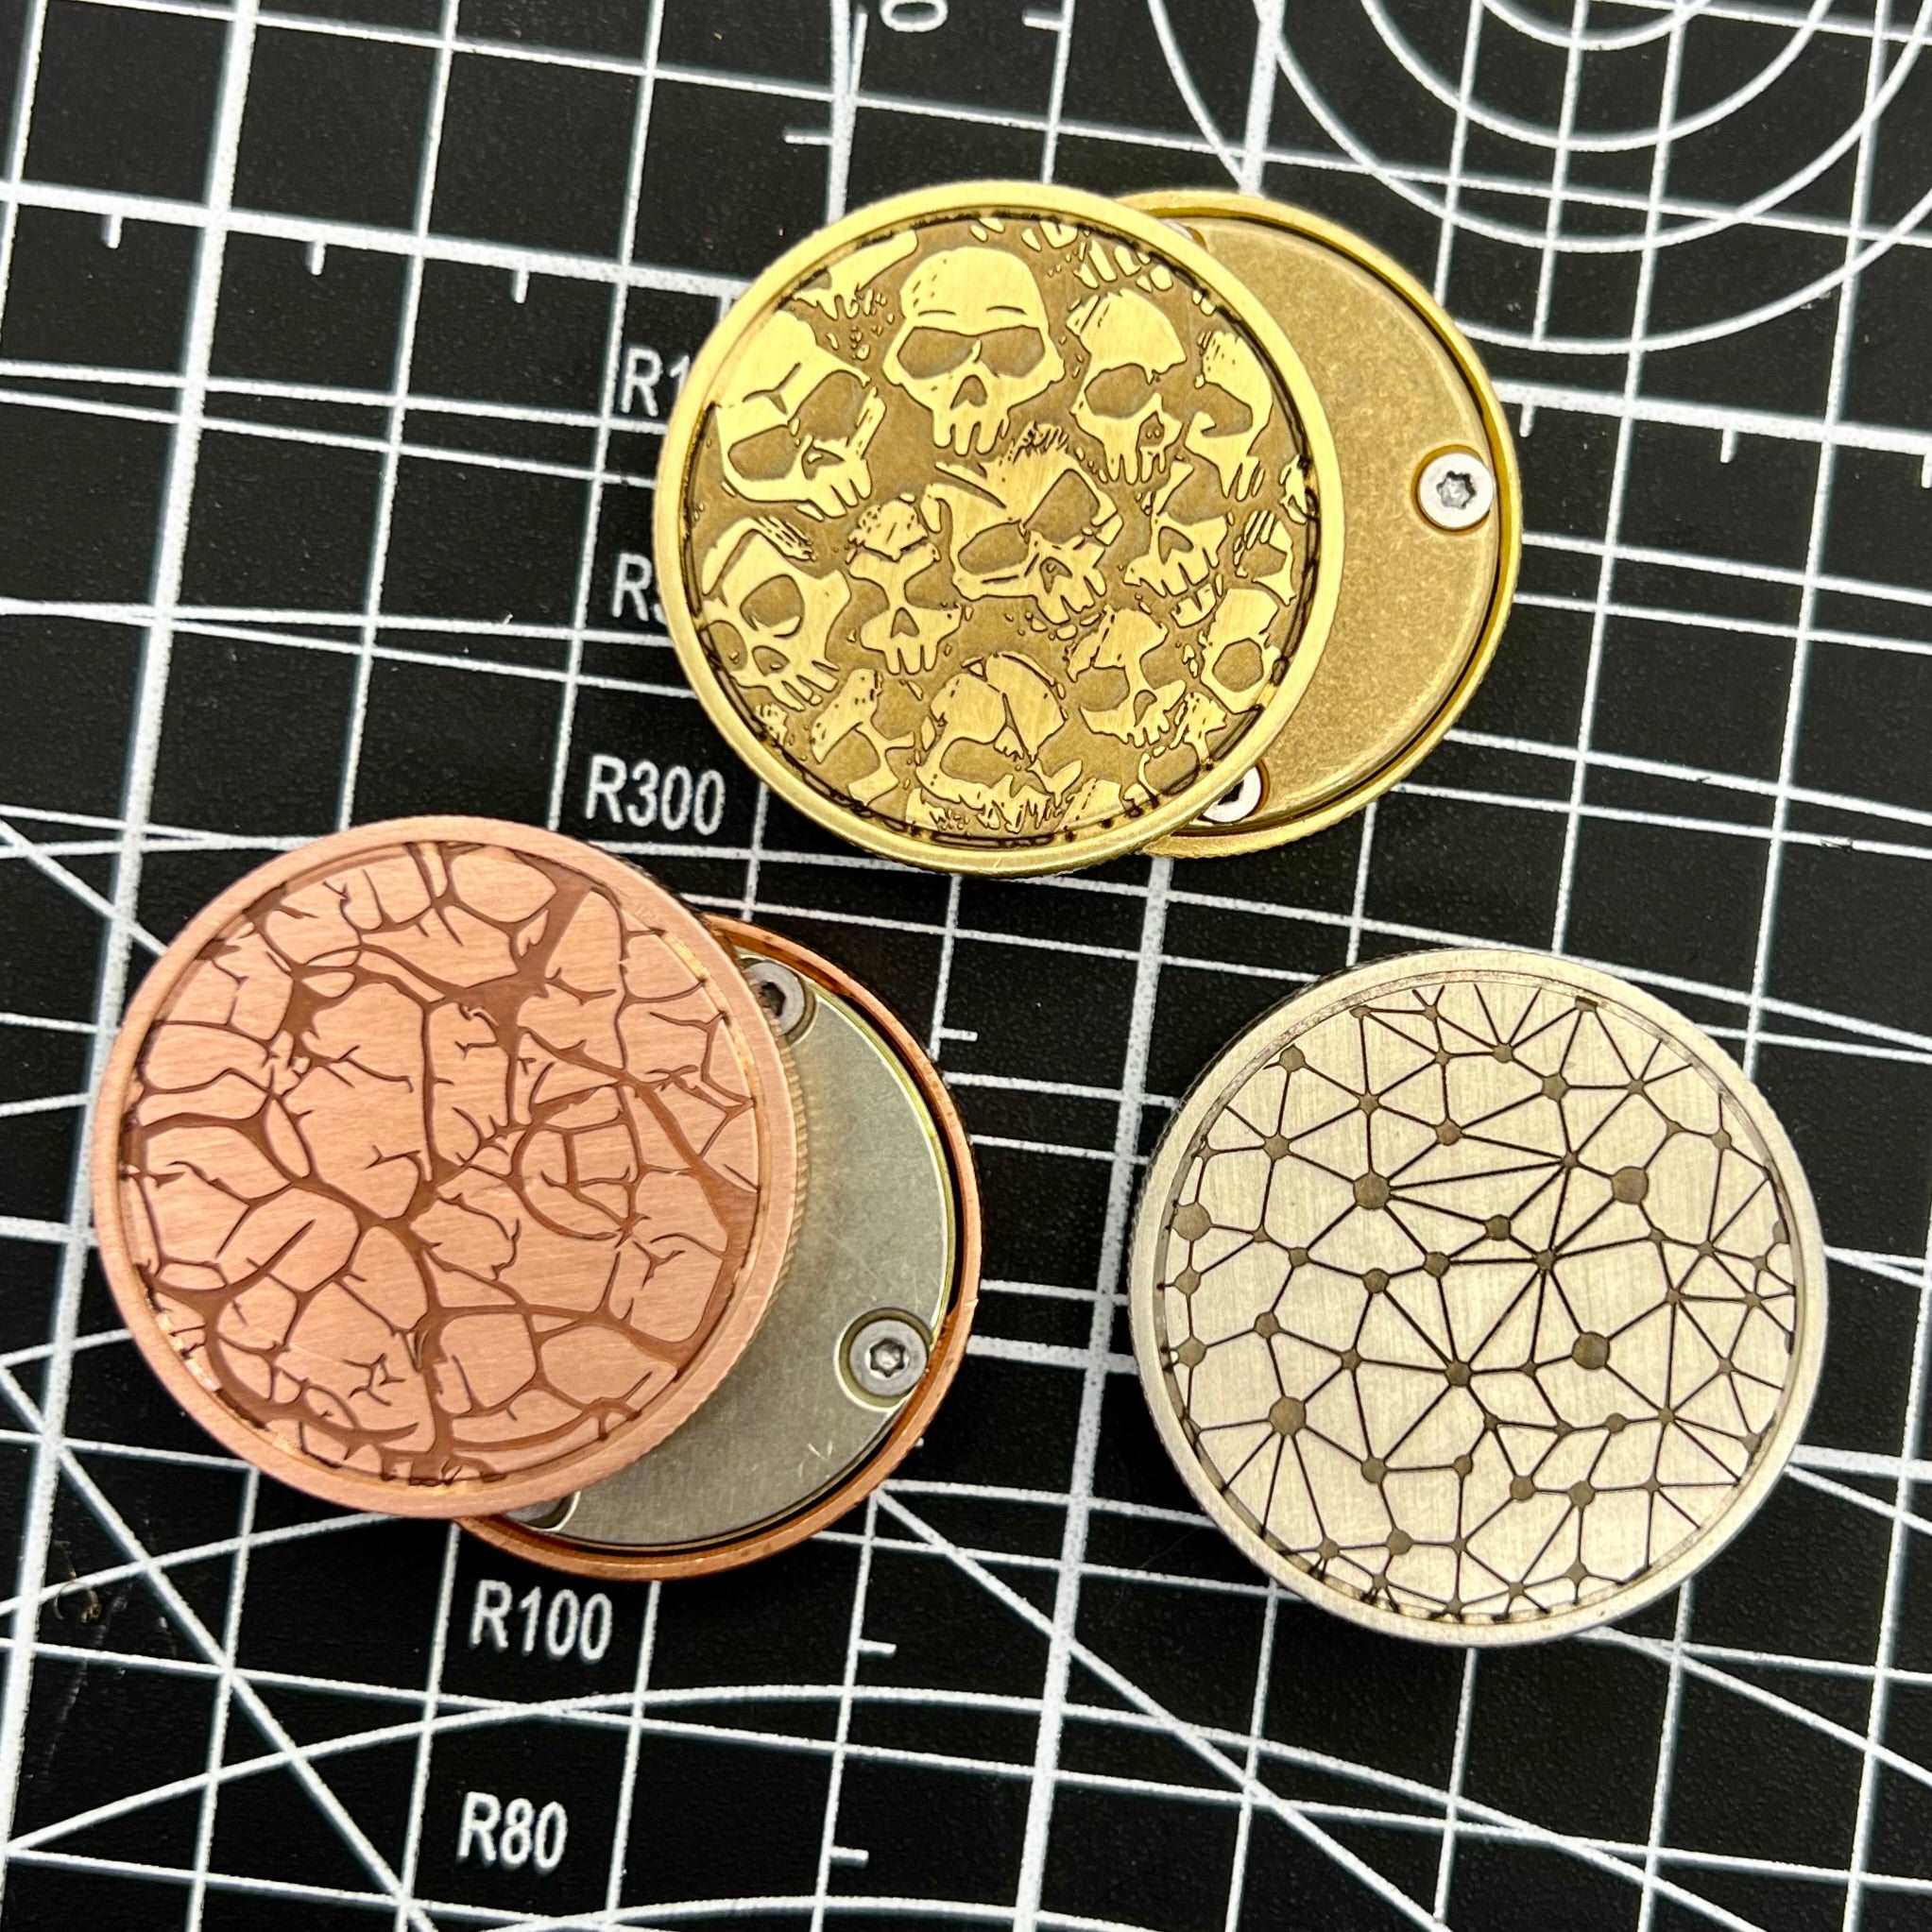 CoinFig - Modular Magnetic Coin FidgetThings